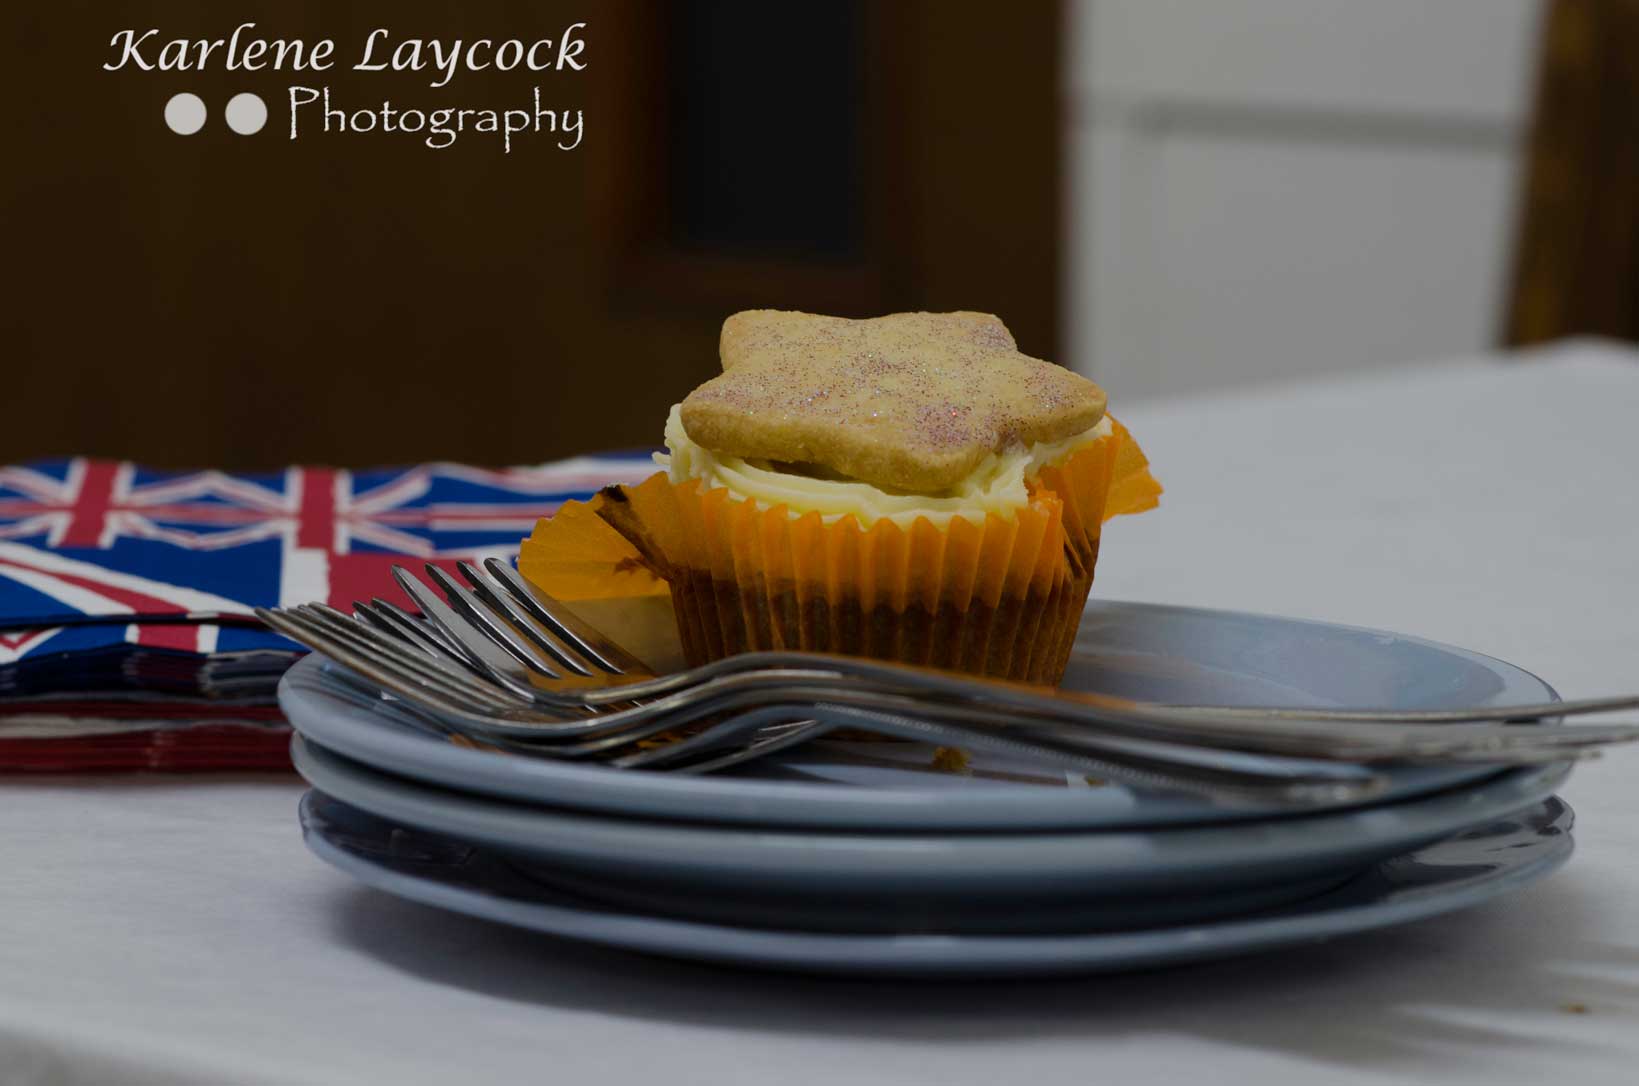 Bake Off Cupcake topped with a Star Biscuit on a Saucer with Forks